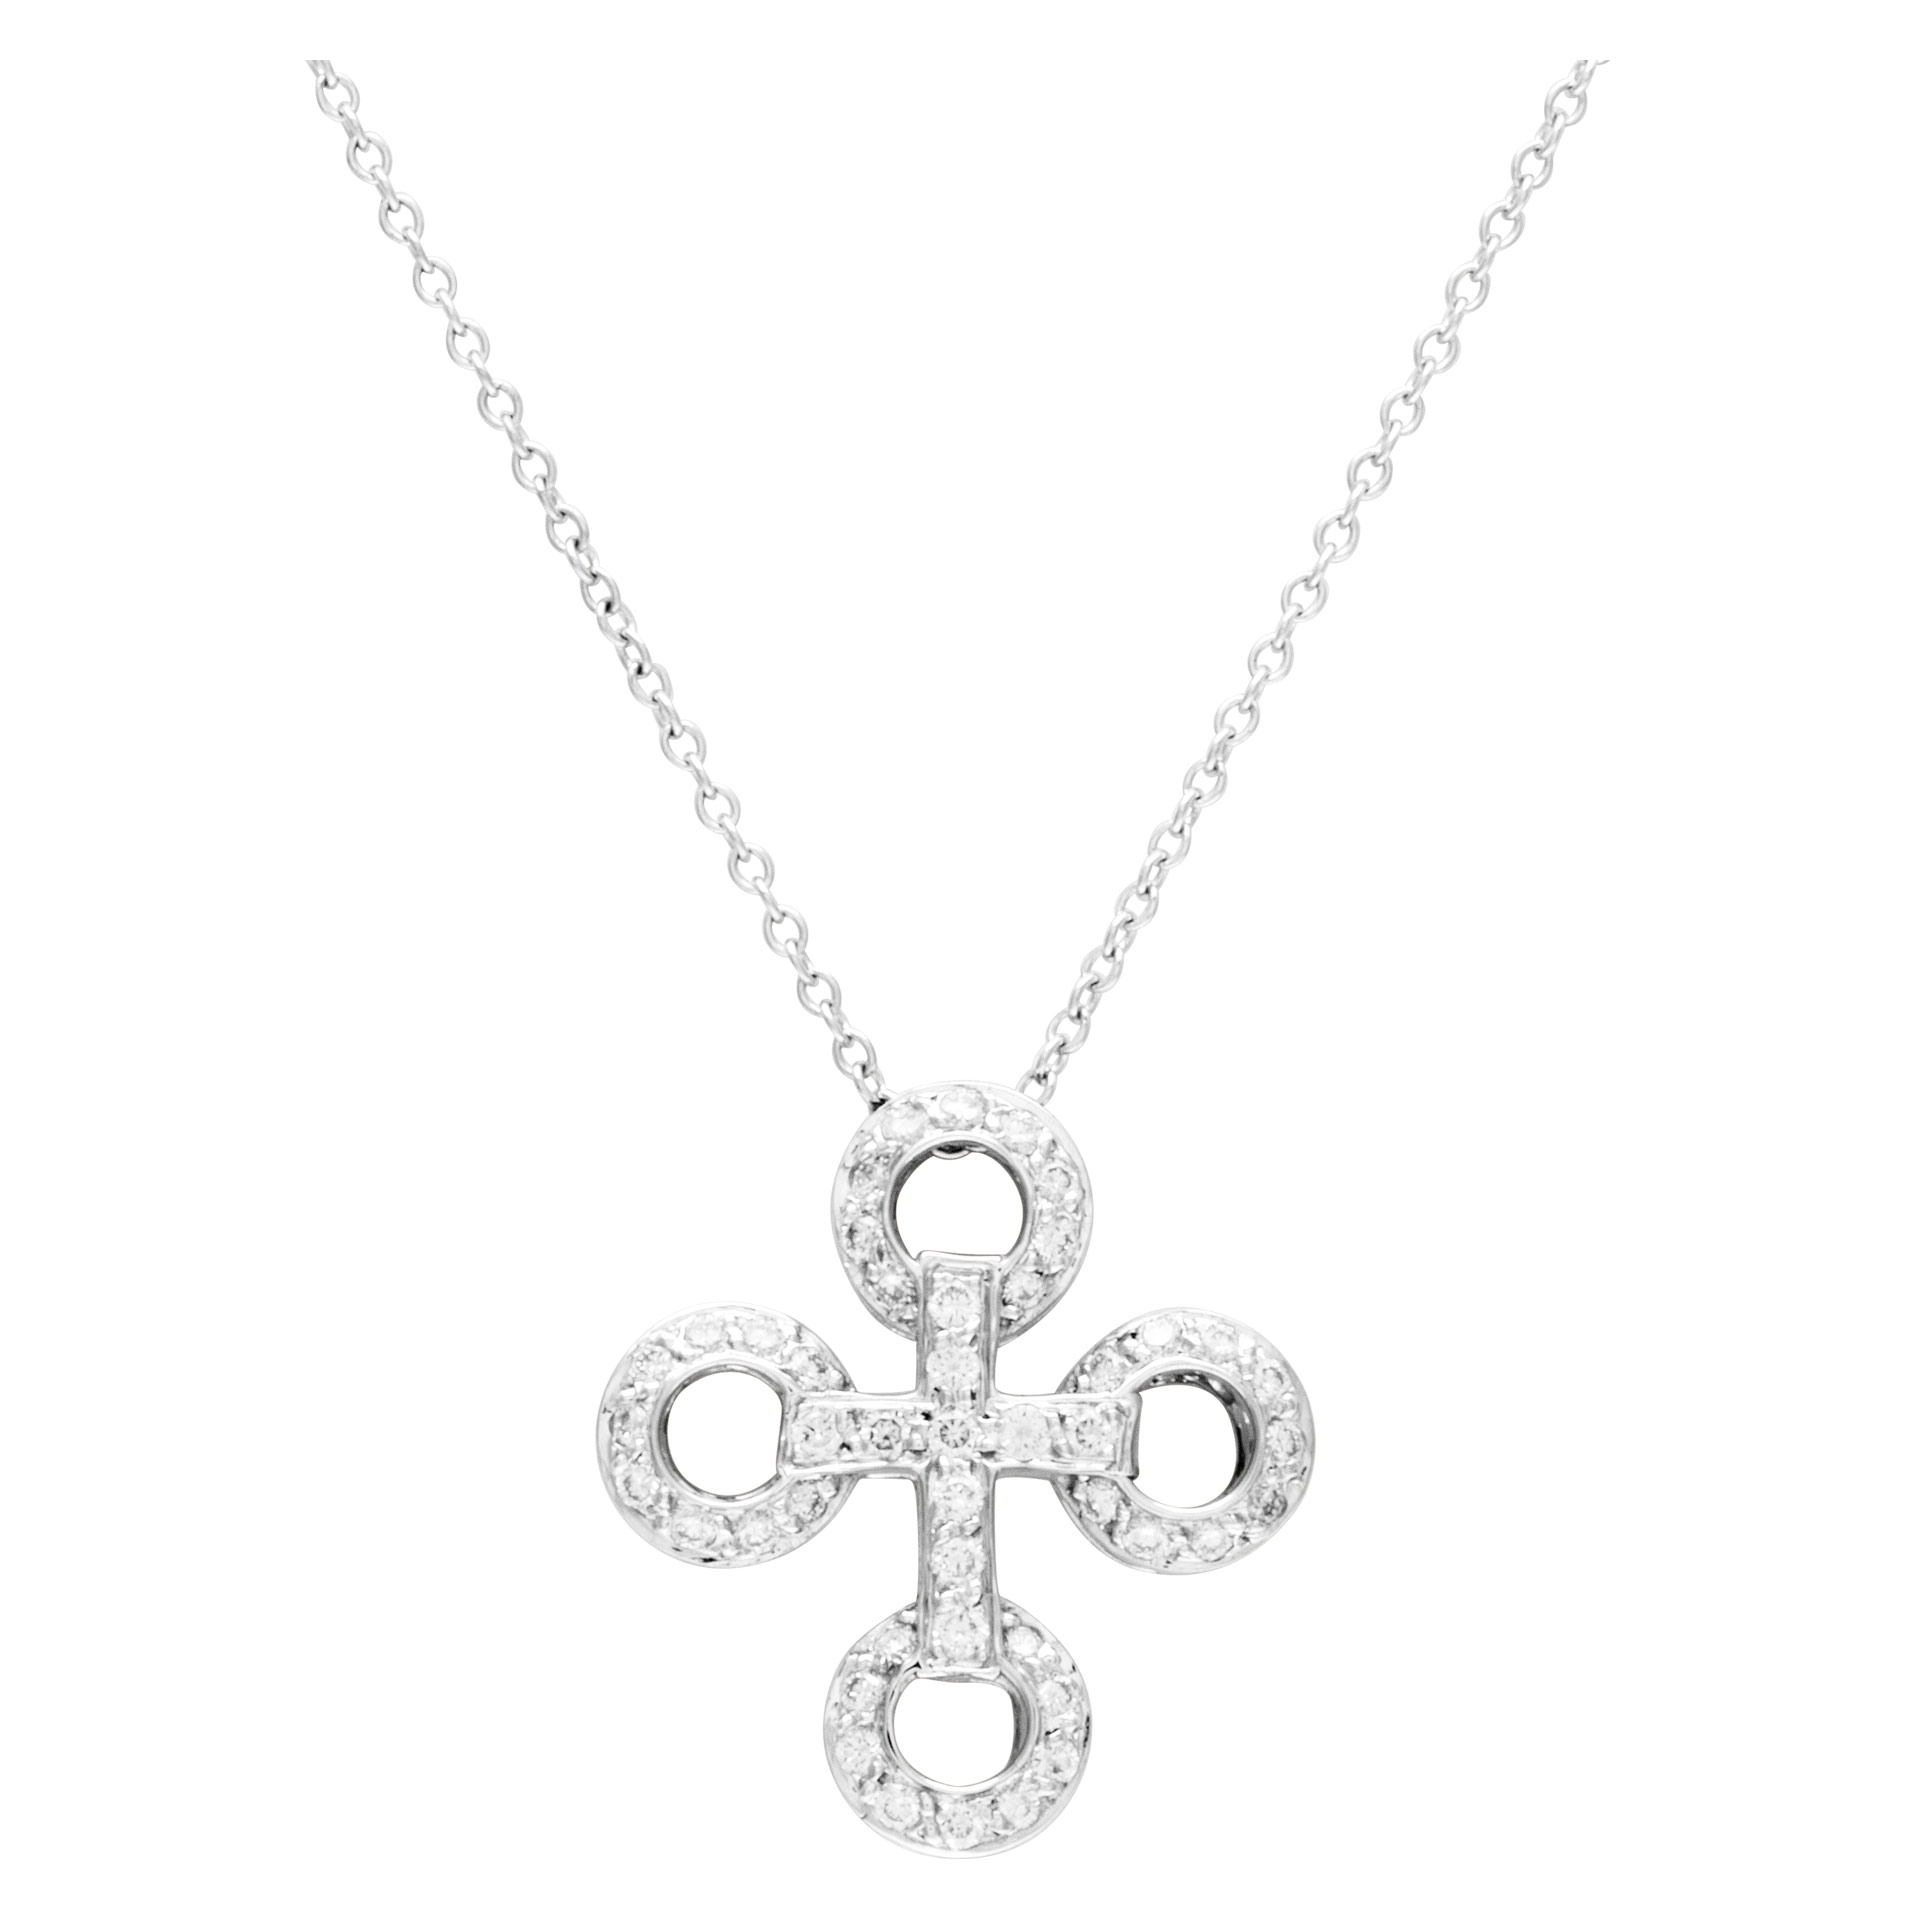 Pave Diamond cross necklace in 18k white gold. 0.50 carats in diamonds